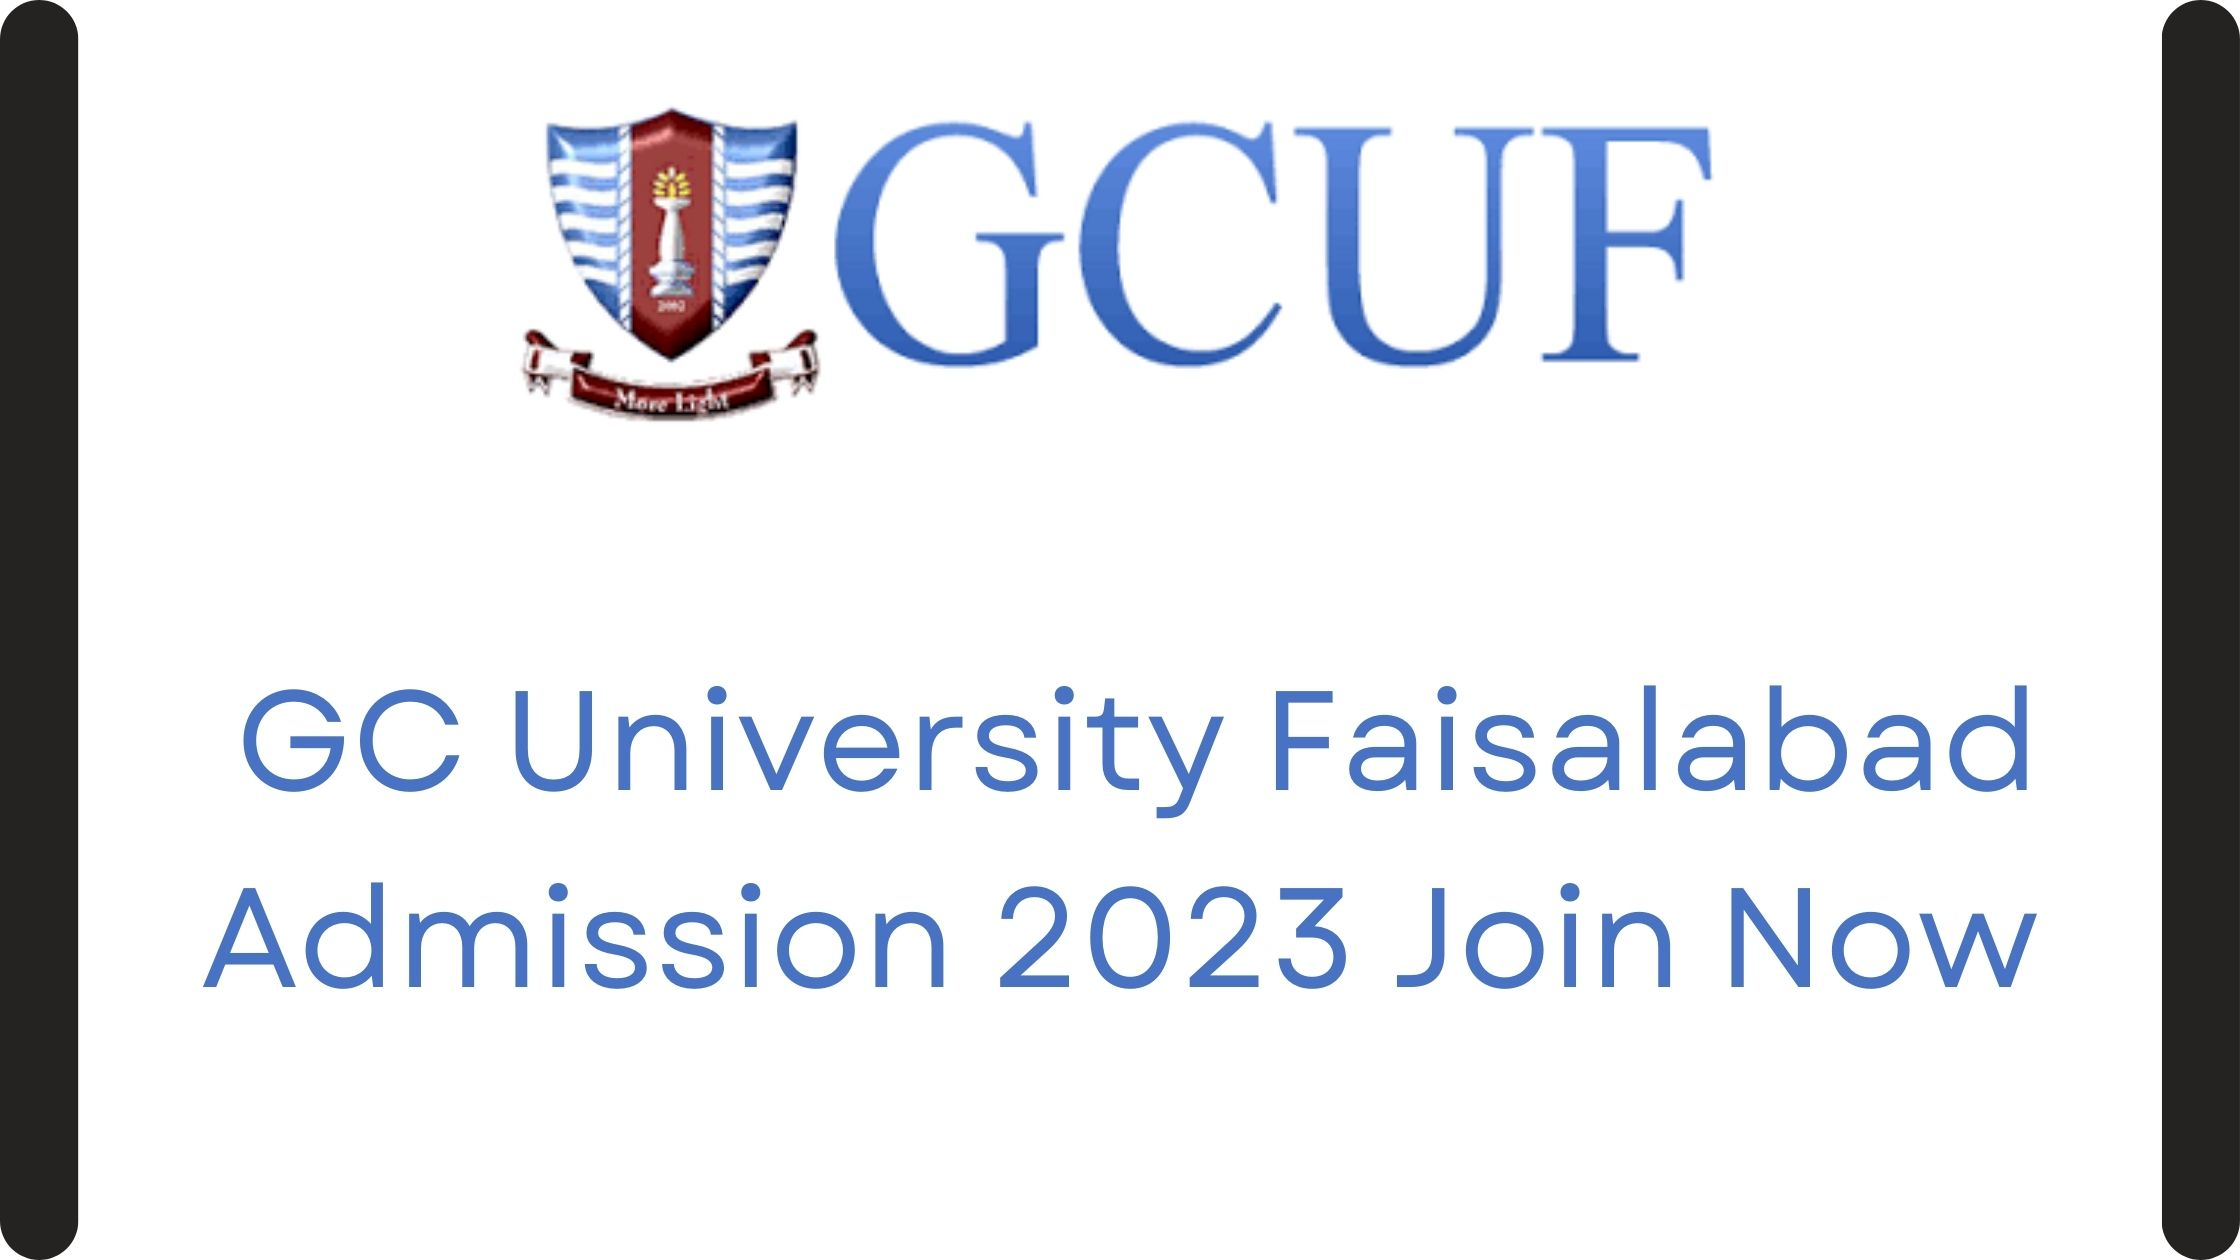 GC University Faisalabad Admission 2023 Join Now